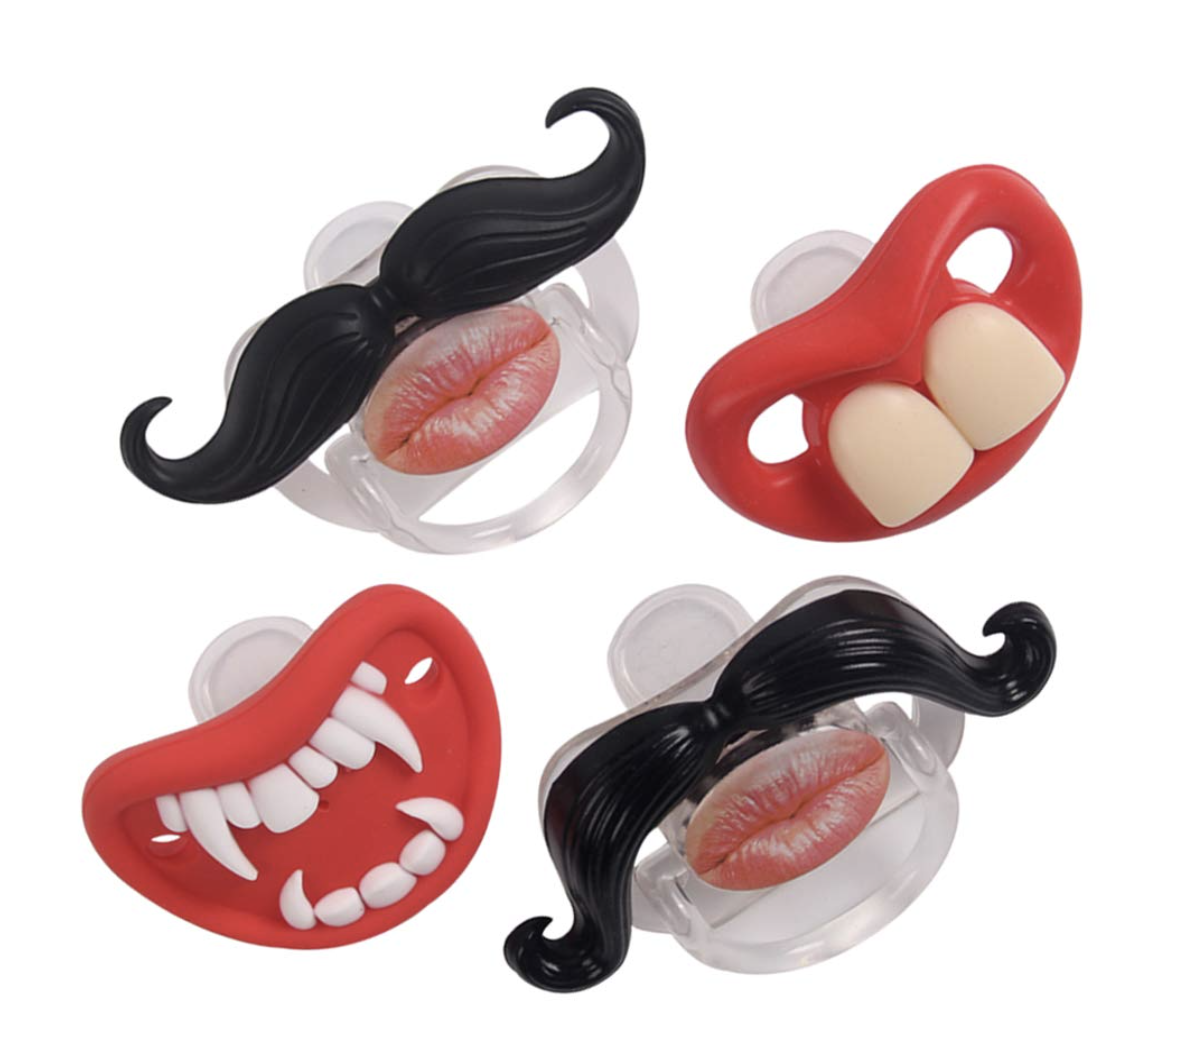 TMROW Cute Baby Pacifiers Designed Funny Teeth and Mustaches Make Them a Perfect Baby Shower Gift